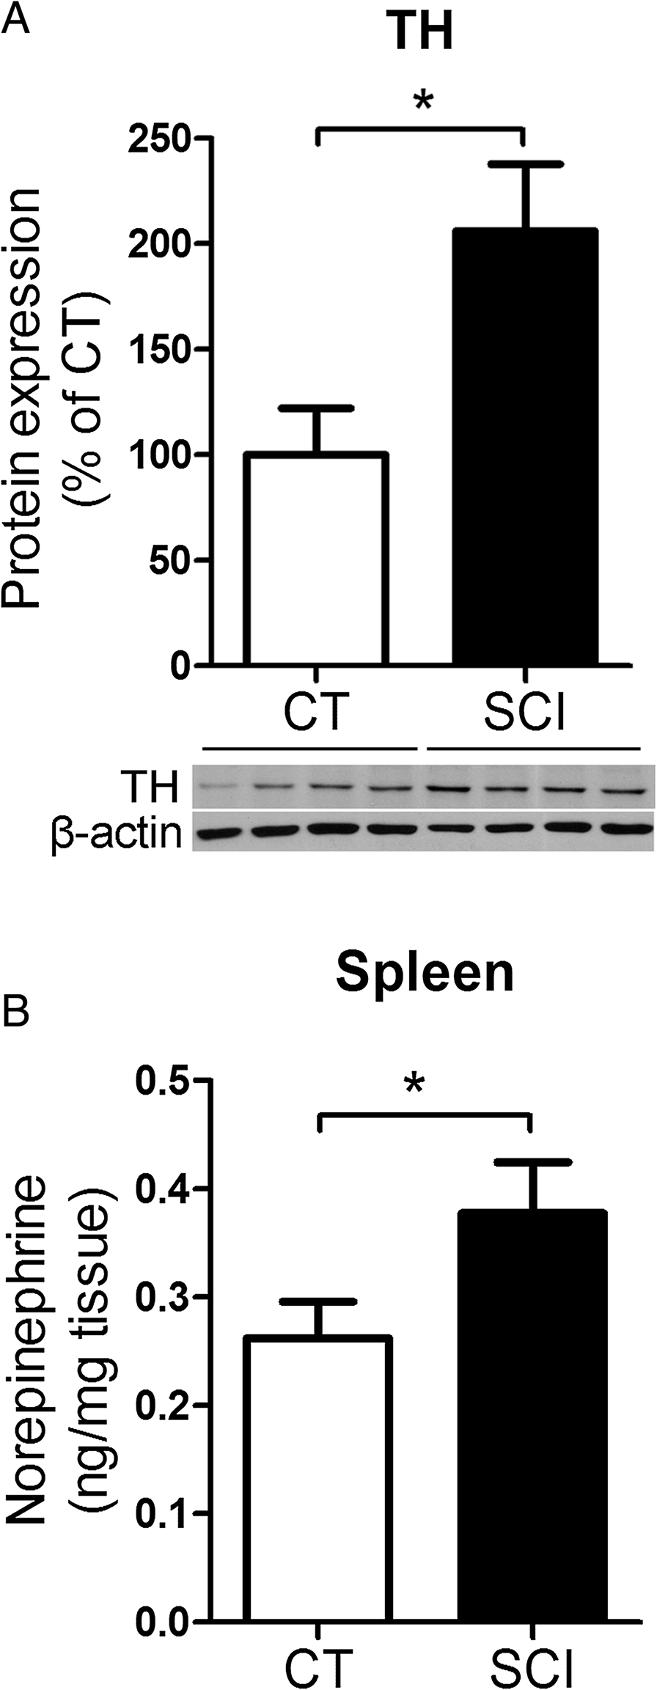 Zha et al. Journal of Neuroinflammation 2014, 11:65 Page 13 of 18 Figure 8 Chronic spinal cord injury (SCI) increases the sympathetic activity in the spleen.